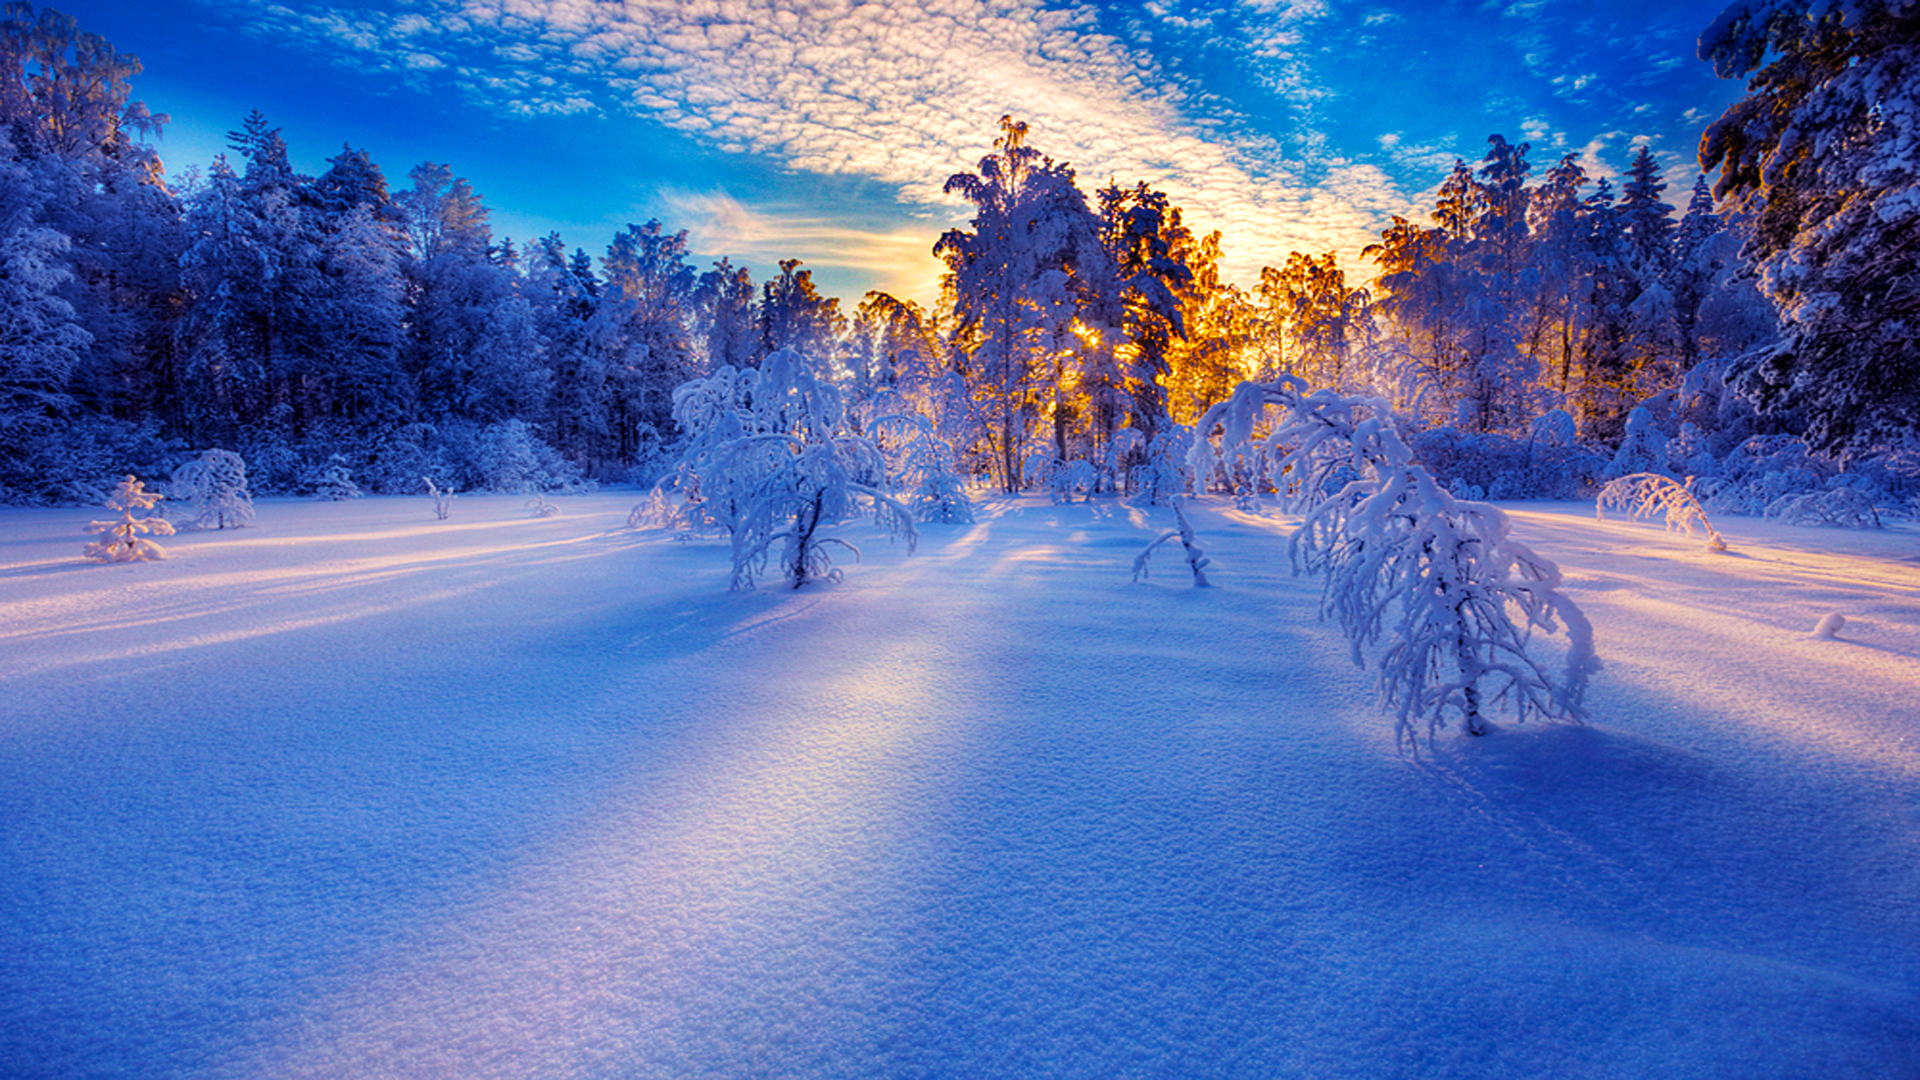 Snow sunrise wallpaper. iOS wallpaper and Android wallpaper